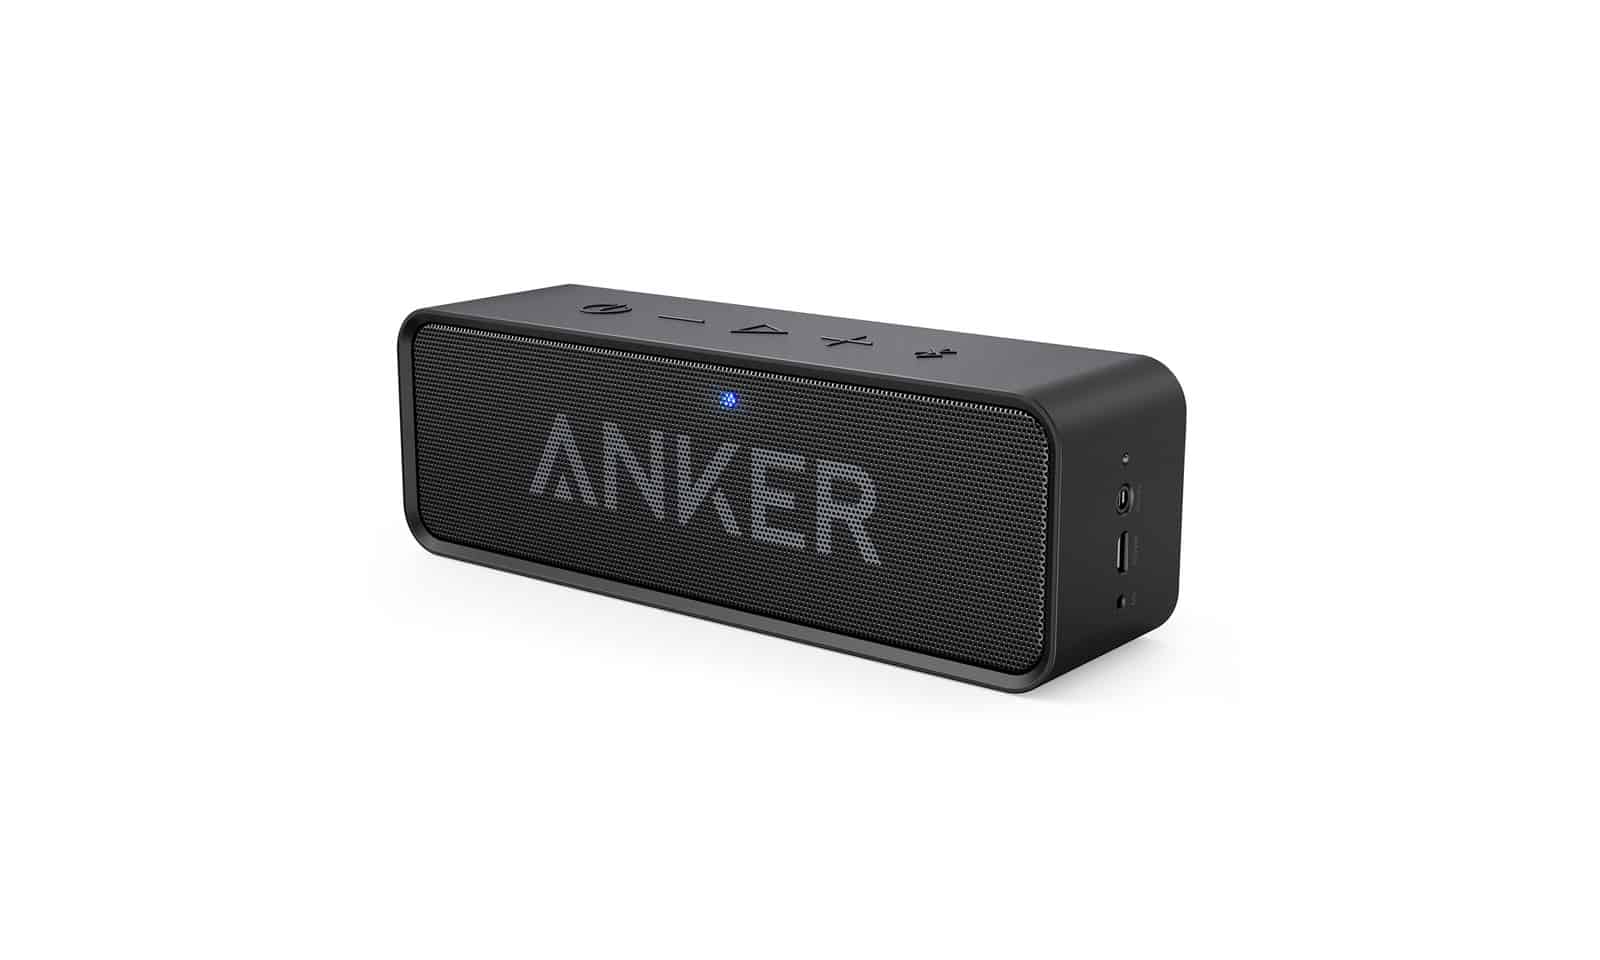 Anker's utilitarian unit is a low-cost gem.